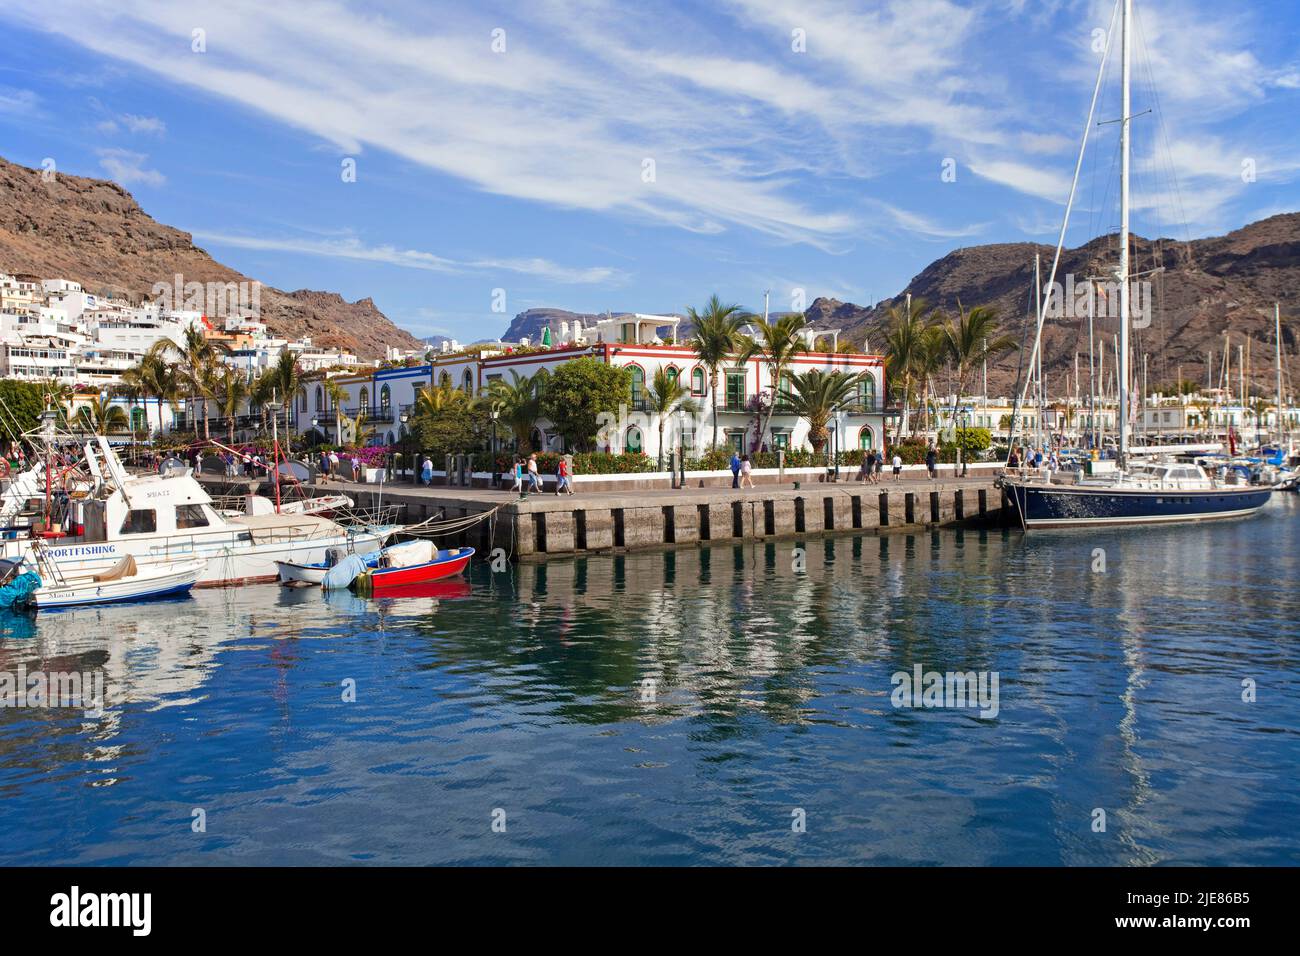 Boats in the harbour of Puerto de Mogan, Grand Canary, Canary islands, Spain, Europe Stock Photo